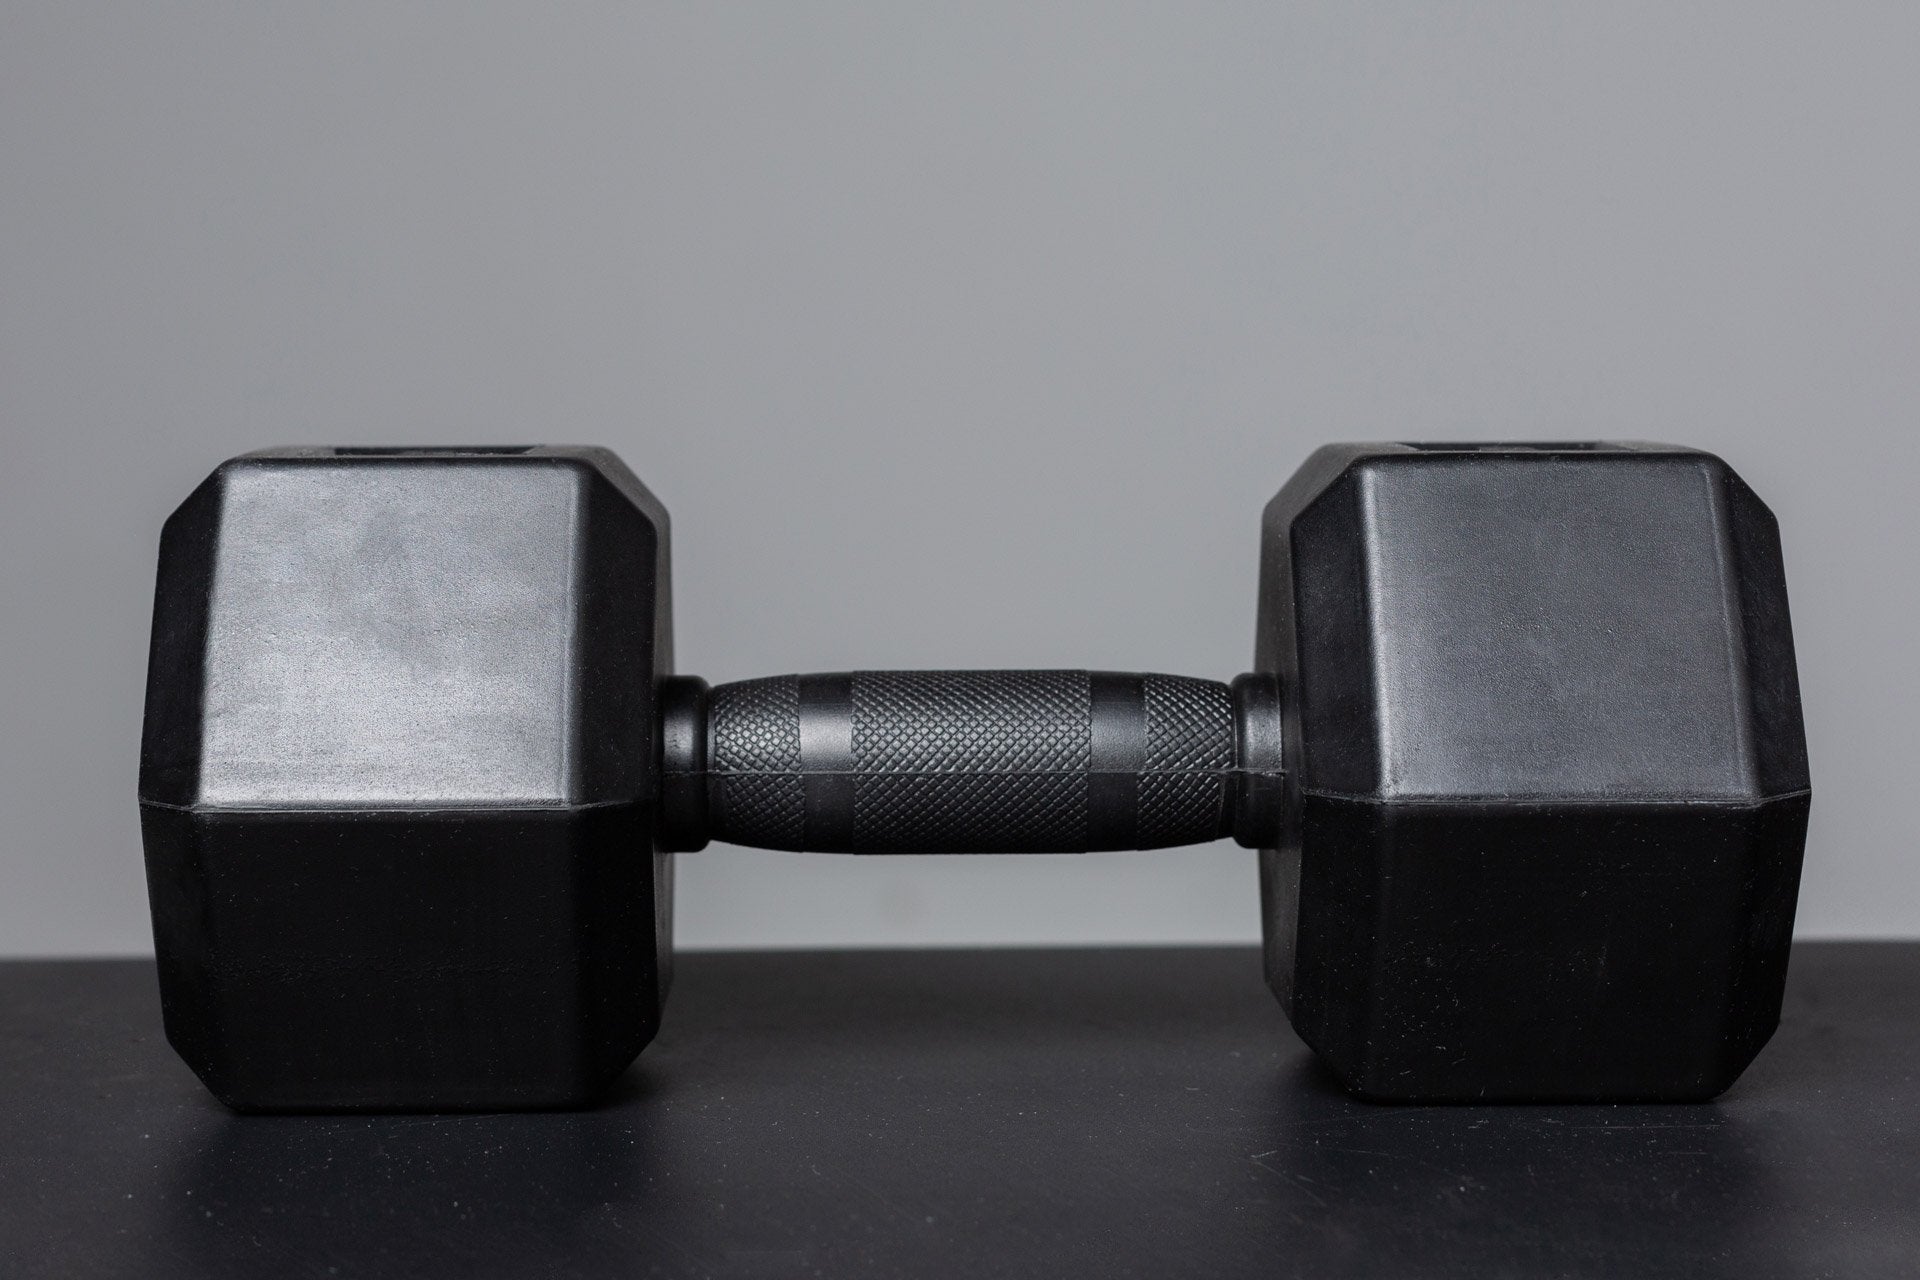 Side view of a Rubber Coated Hex Dumbbell showing the hexagon heads and the center-knurled ergonomic handle.